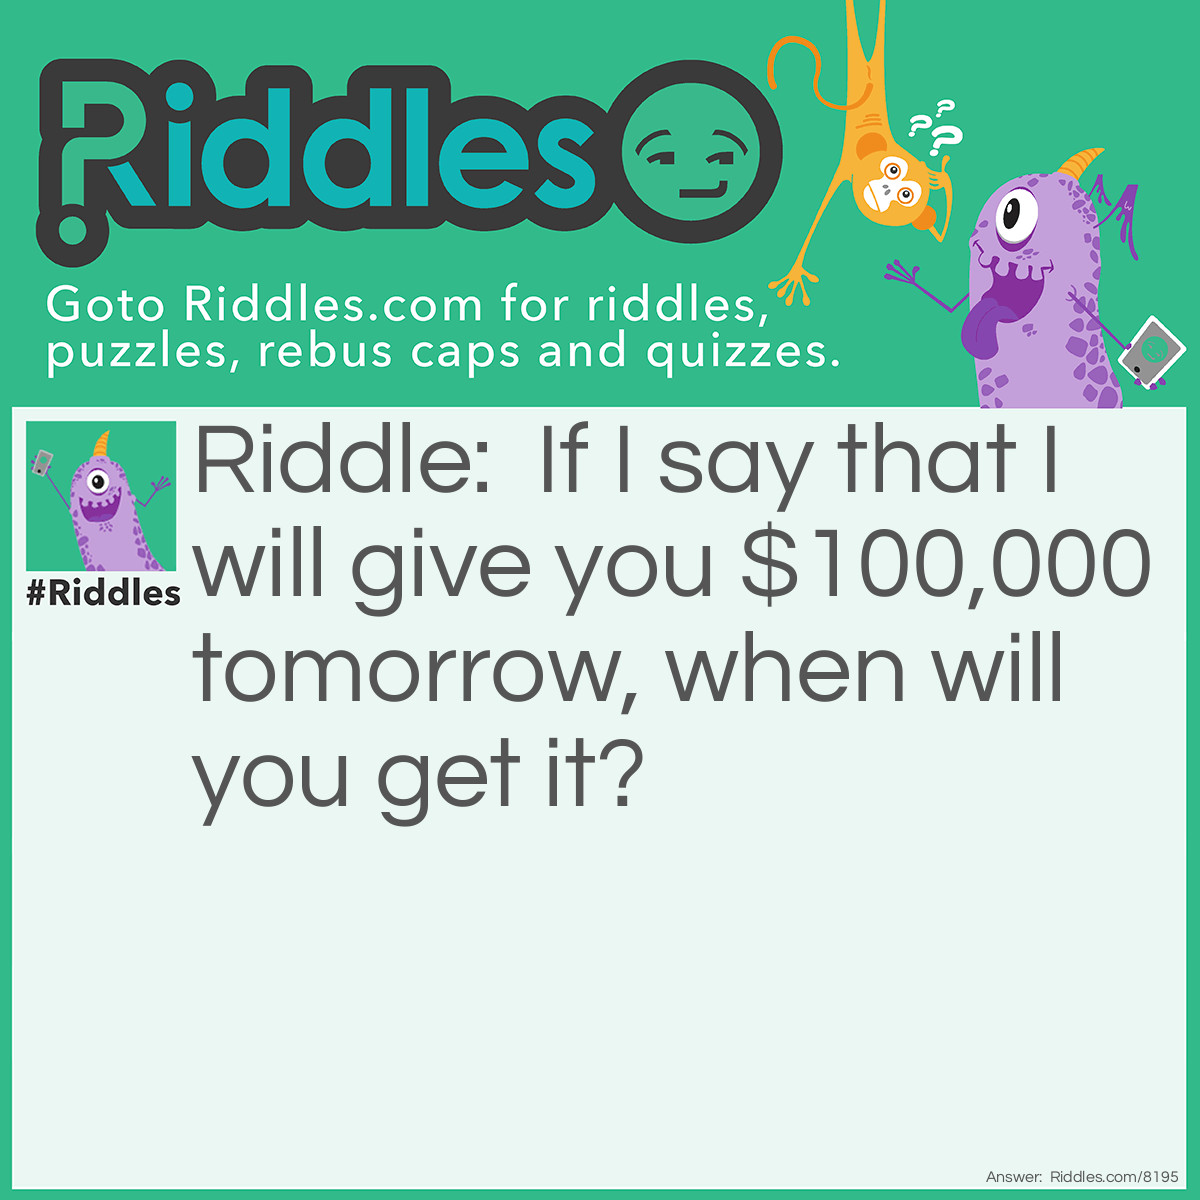 Riddle: If I say that I will give you $100,000 tomorrow, when will you get it? Answer: Never! Tomorrow NEVER EVER comes! It's always TODAY!!!